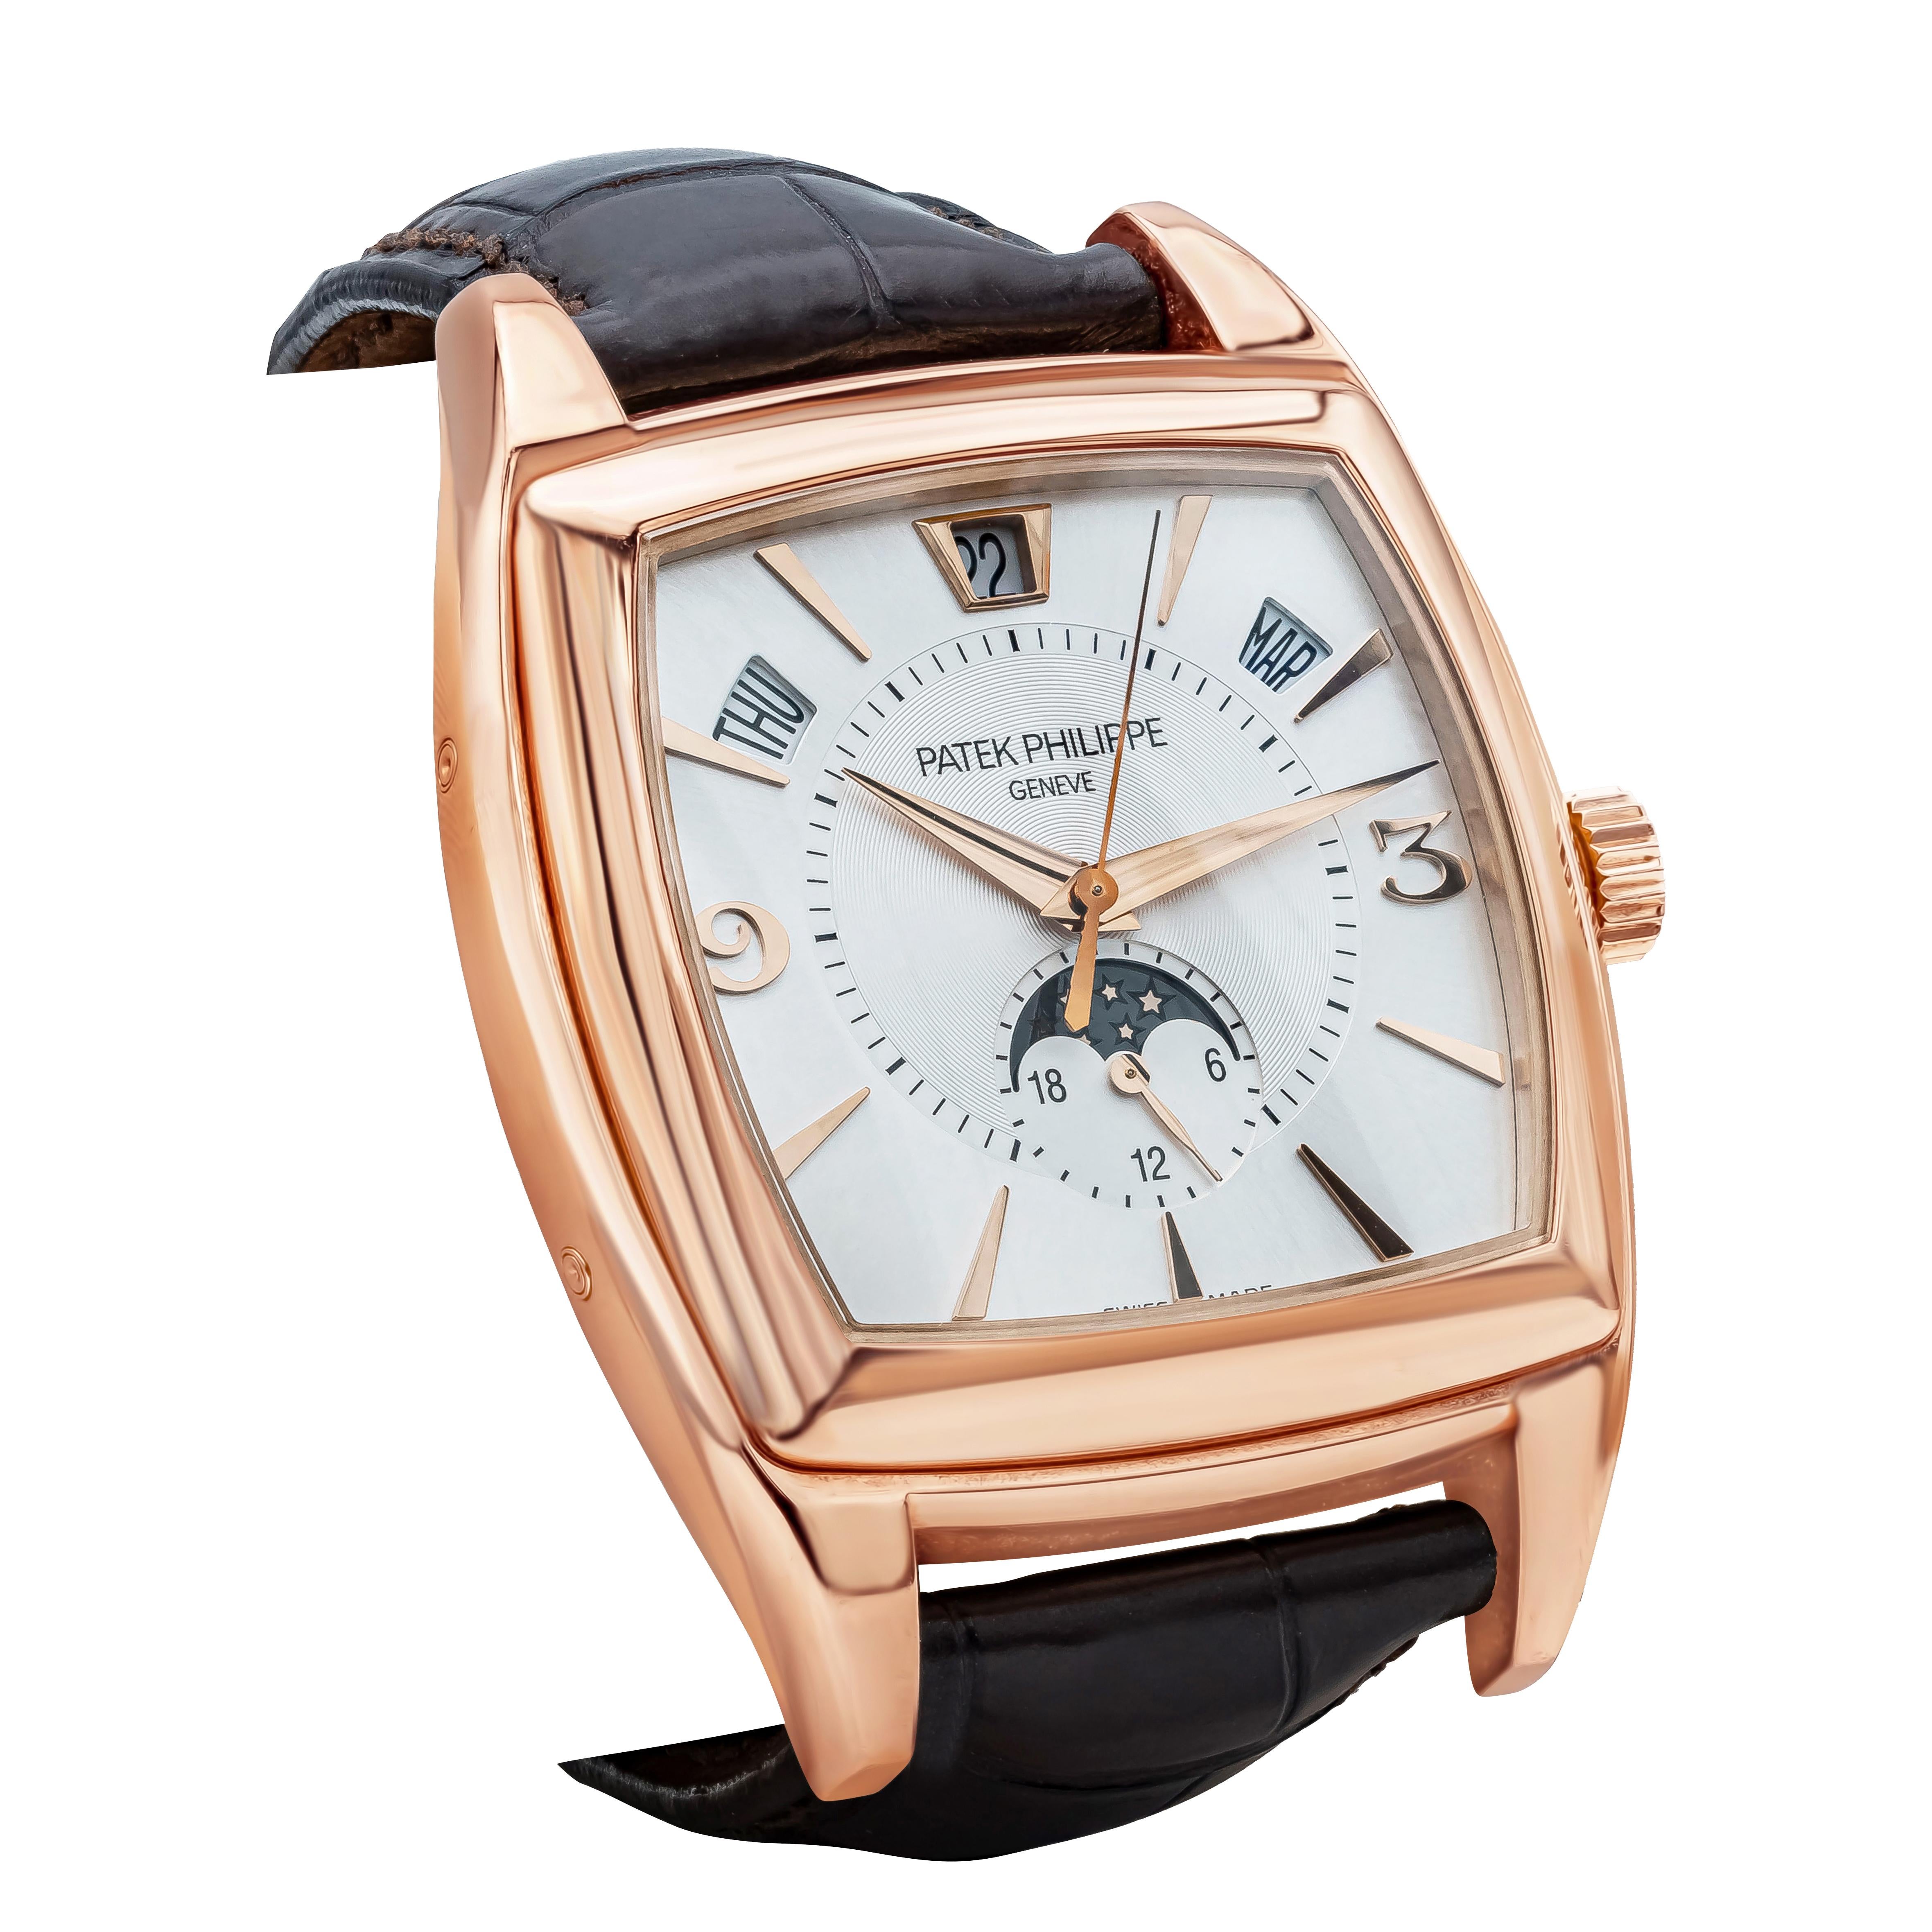 Silvered Dial with Rose Gold Hands, Arabic Numerals and Index Hour Markers, Center Sweep Seconds Hand. 
18K Rose Gold Smooth Bezel, Day-Date-Month Indicators, 24 Hour Subdial with Moonphase, Sapphire Crystal. 
Highest Quality Brown Patek Philippe